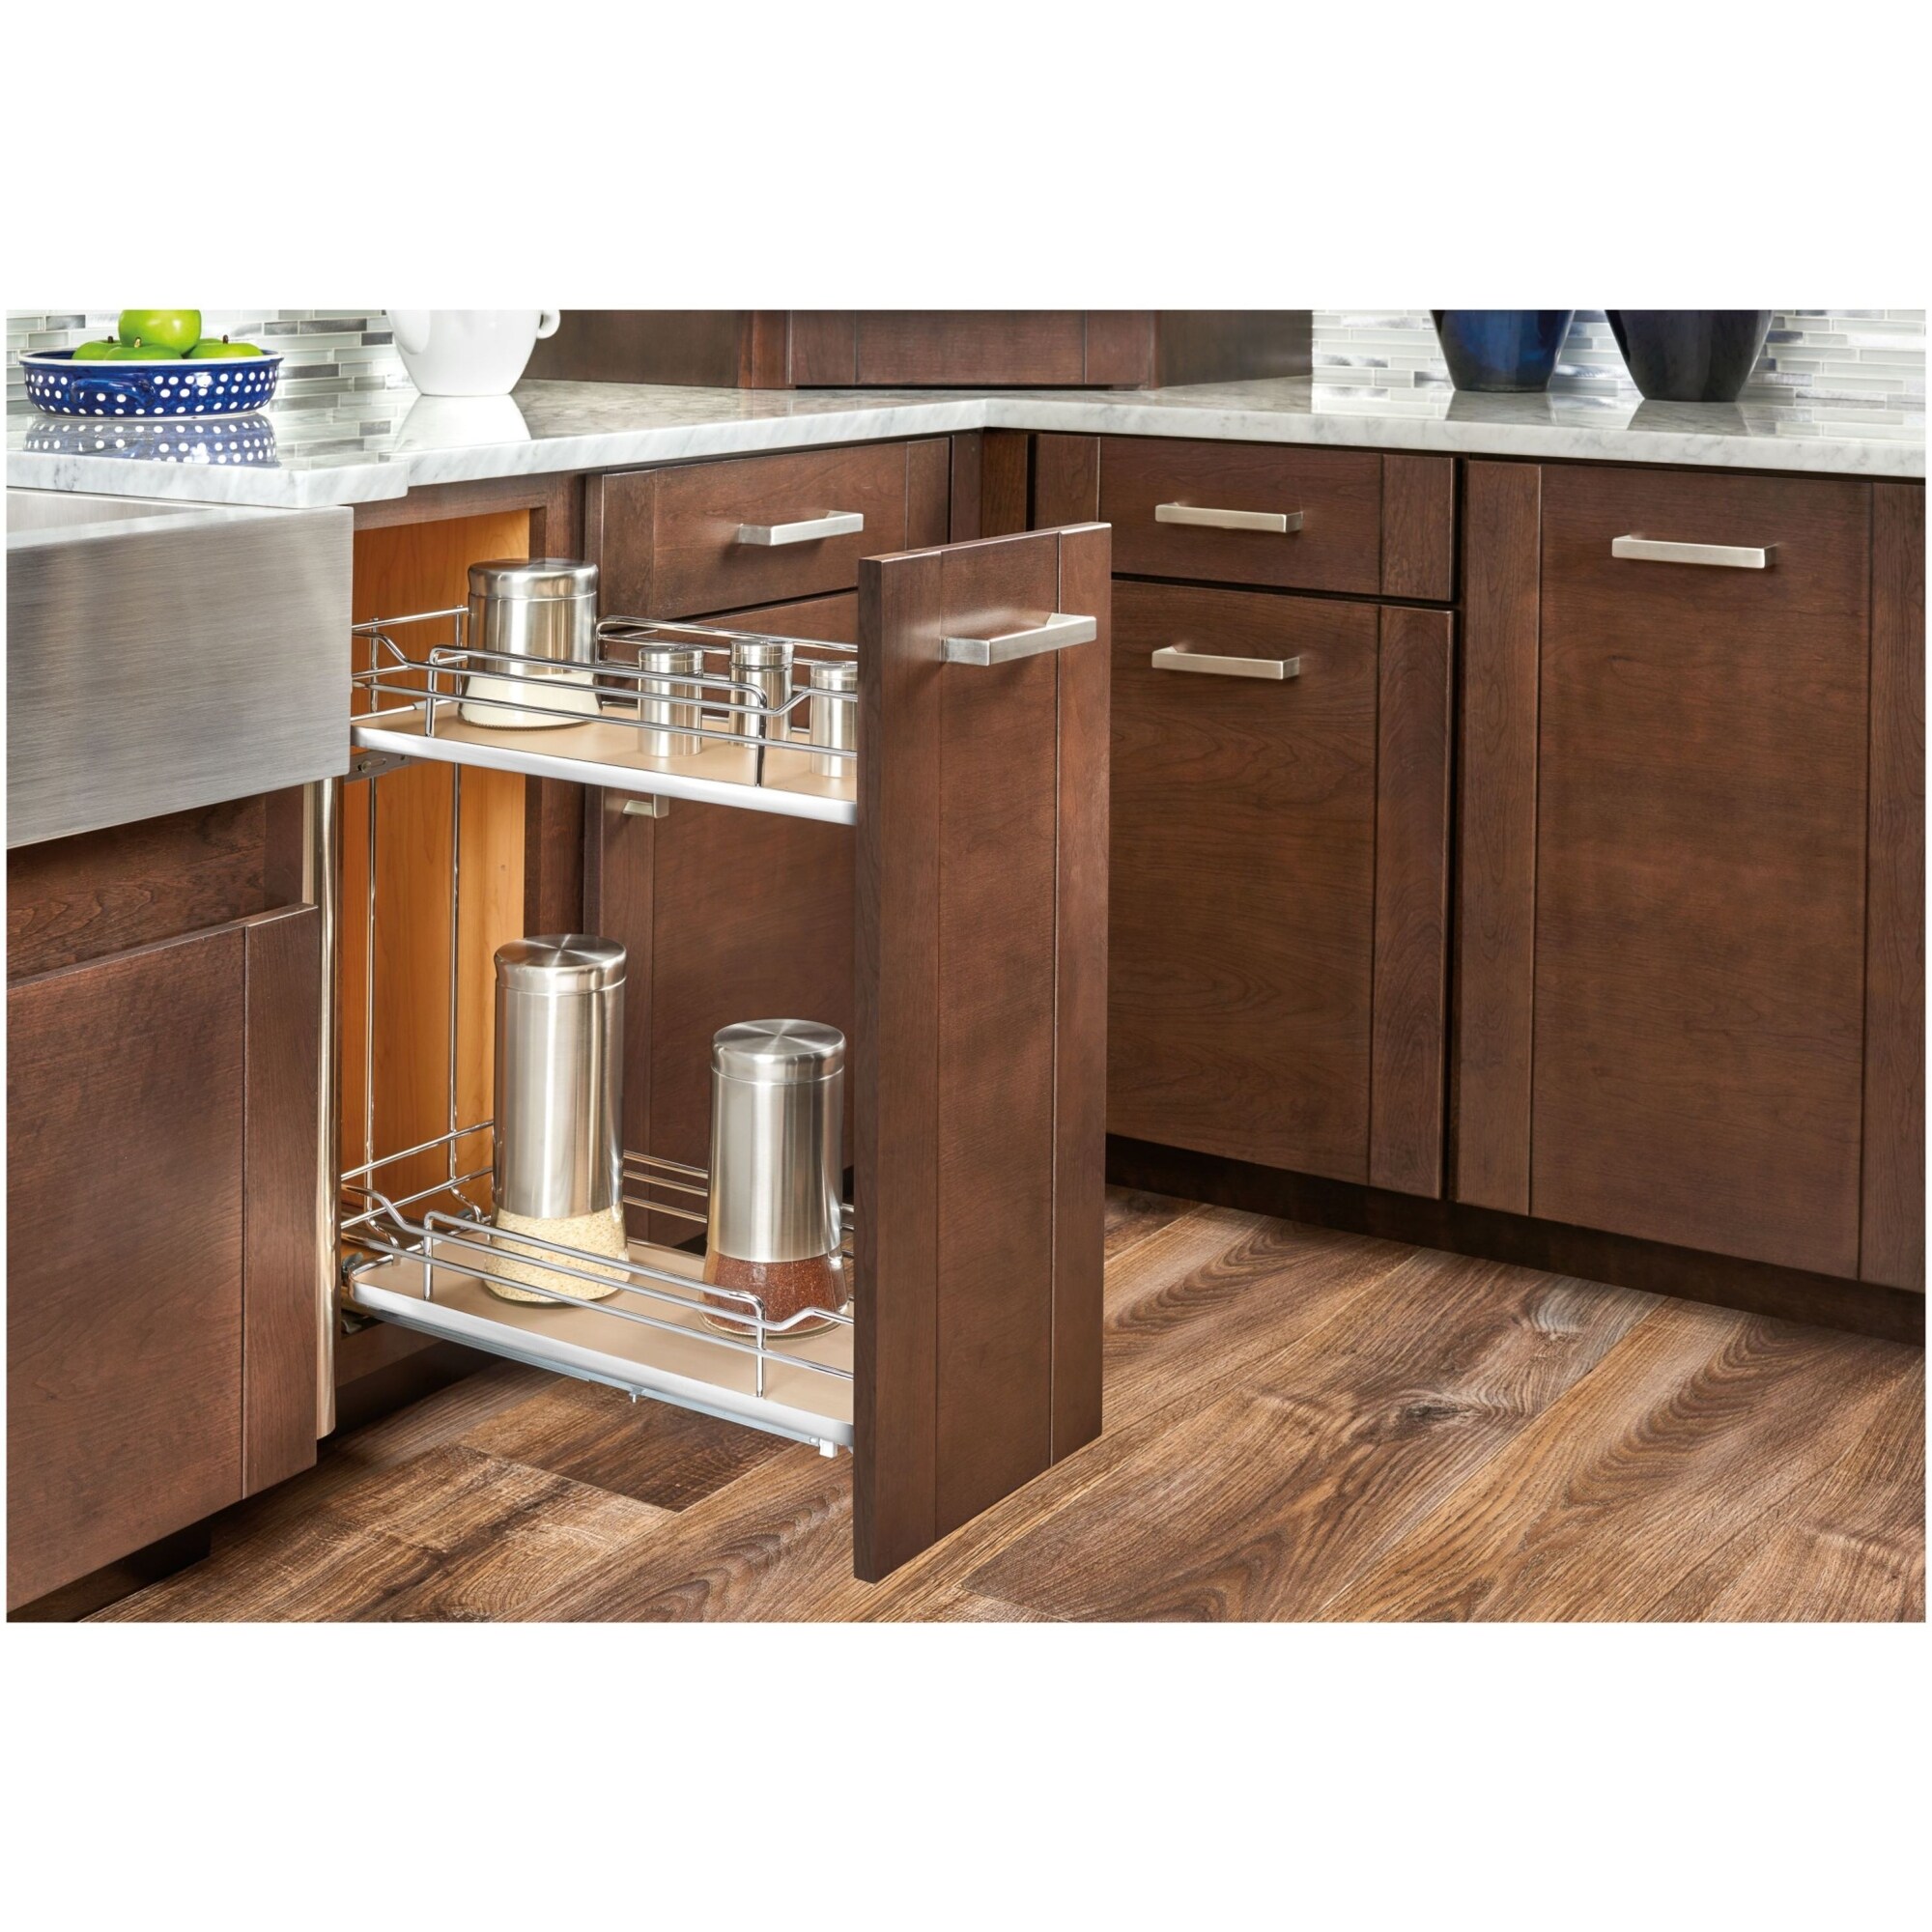 Rev-A-Shelf 11-3/4 Inch Width Kitchen Cabinet Pull-Out 2 Tier Wire